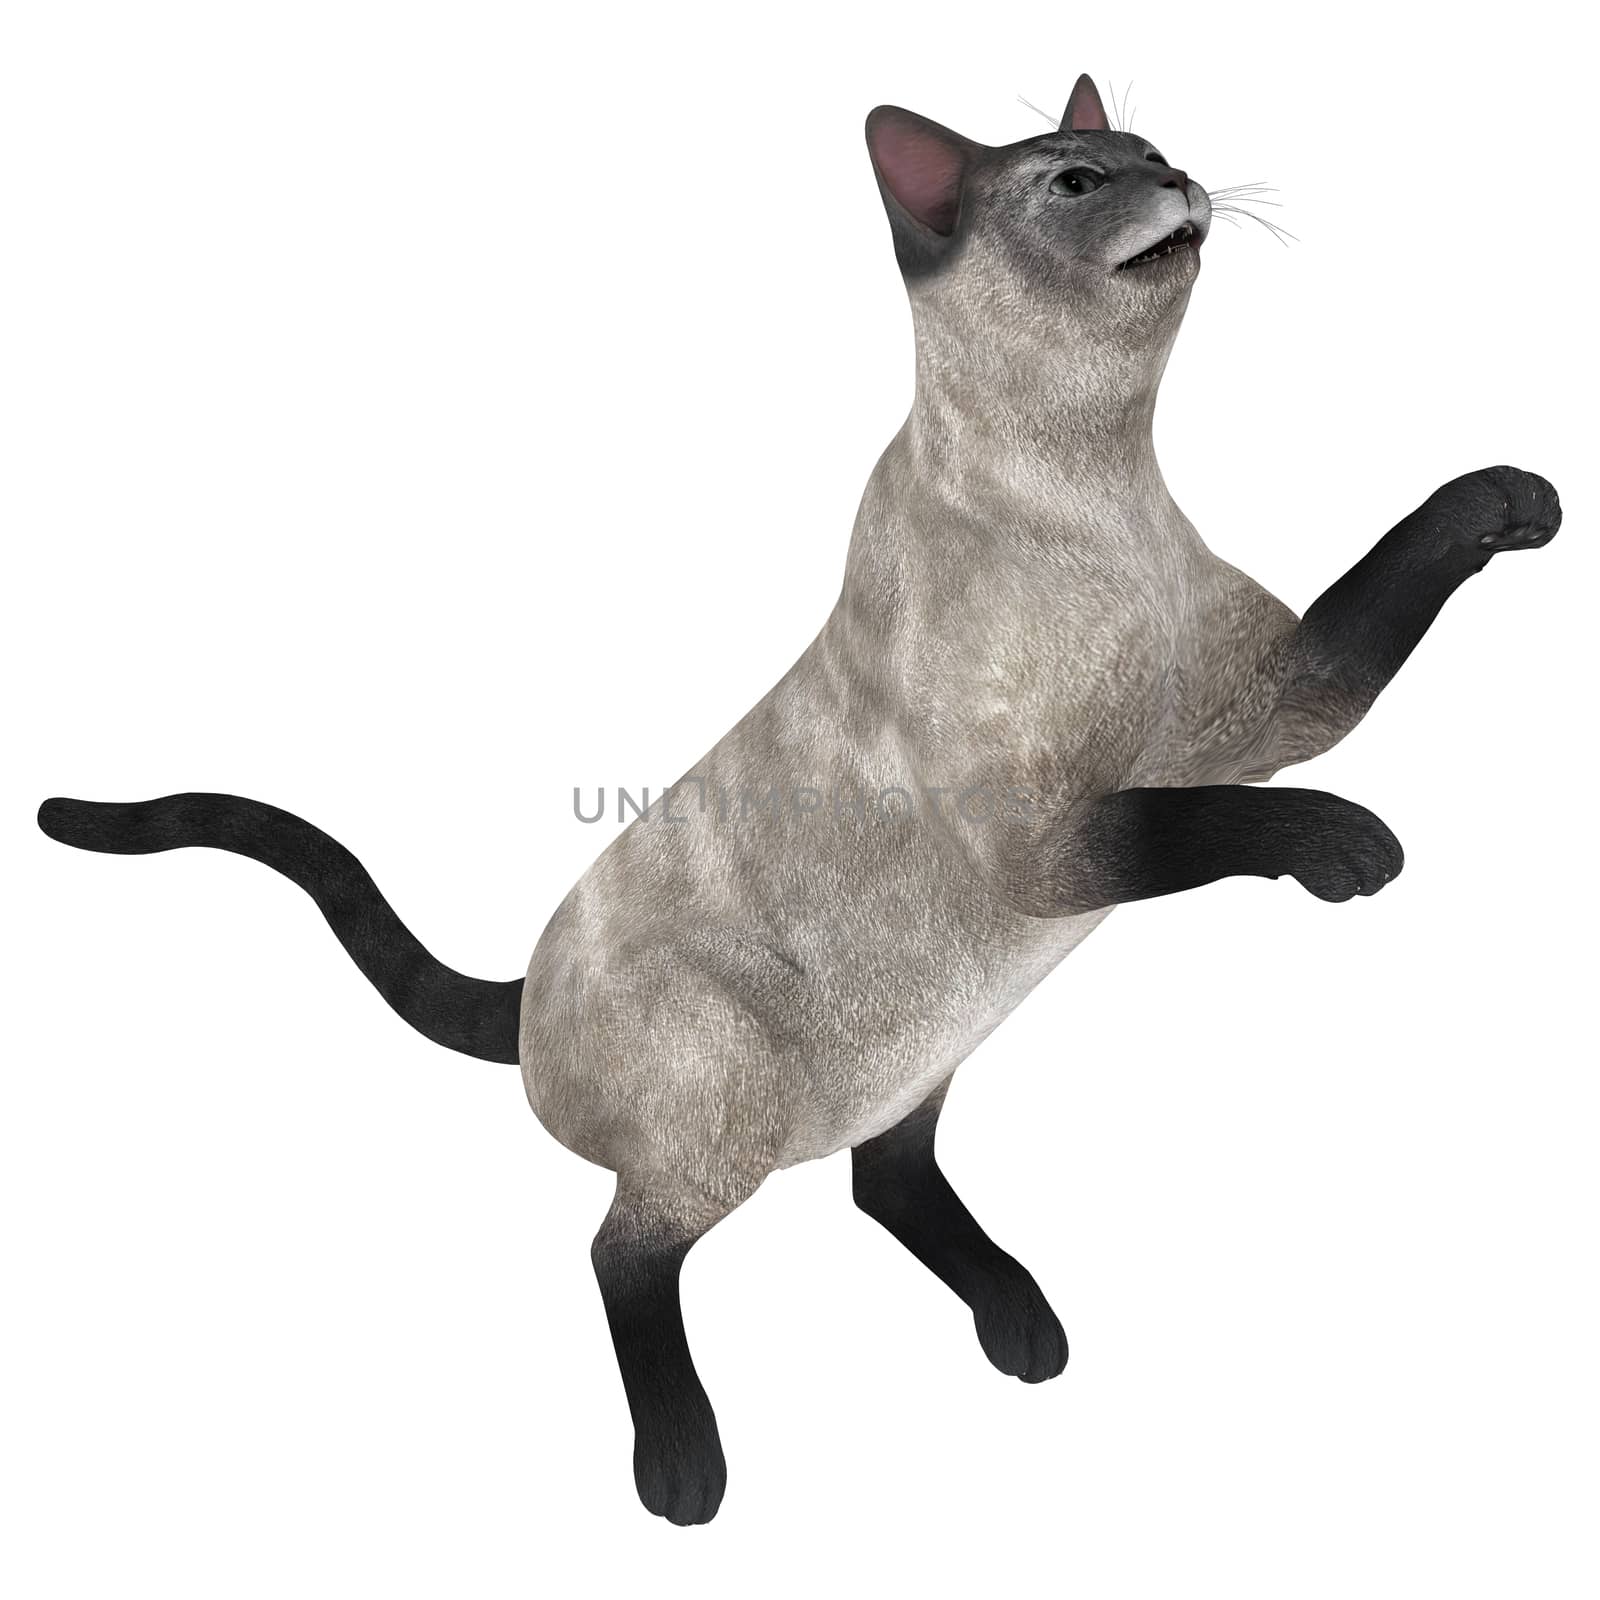 3D digital render of a playing siamese cat isolated on white background